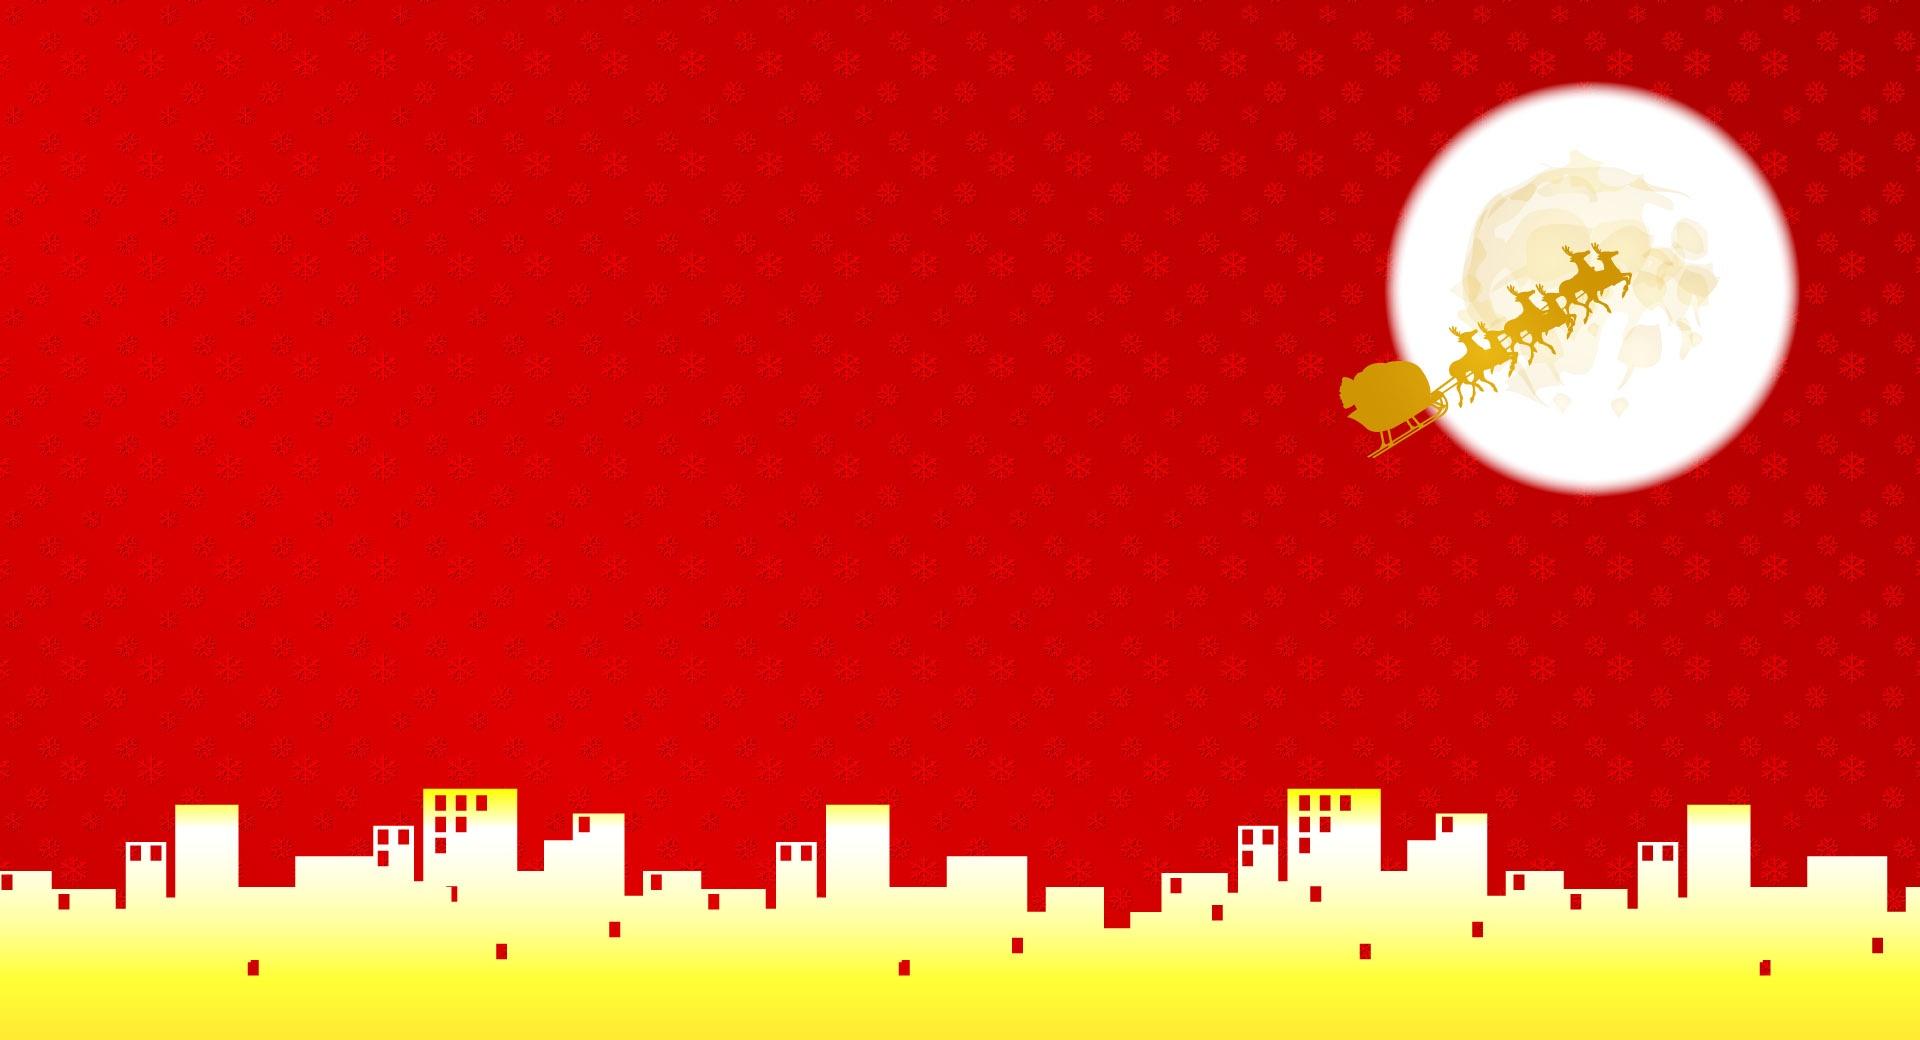 Santa Is Coming For Christmas 2 wallpapers HD quality